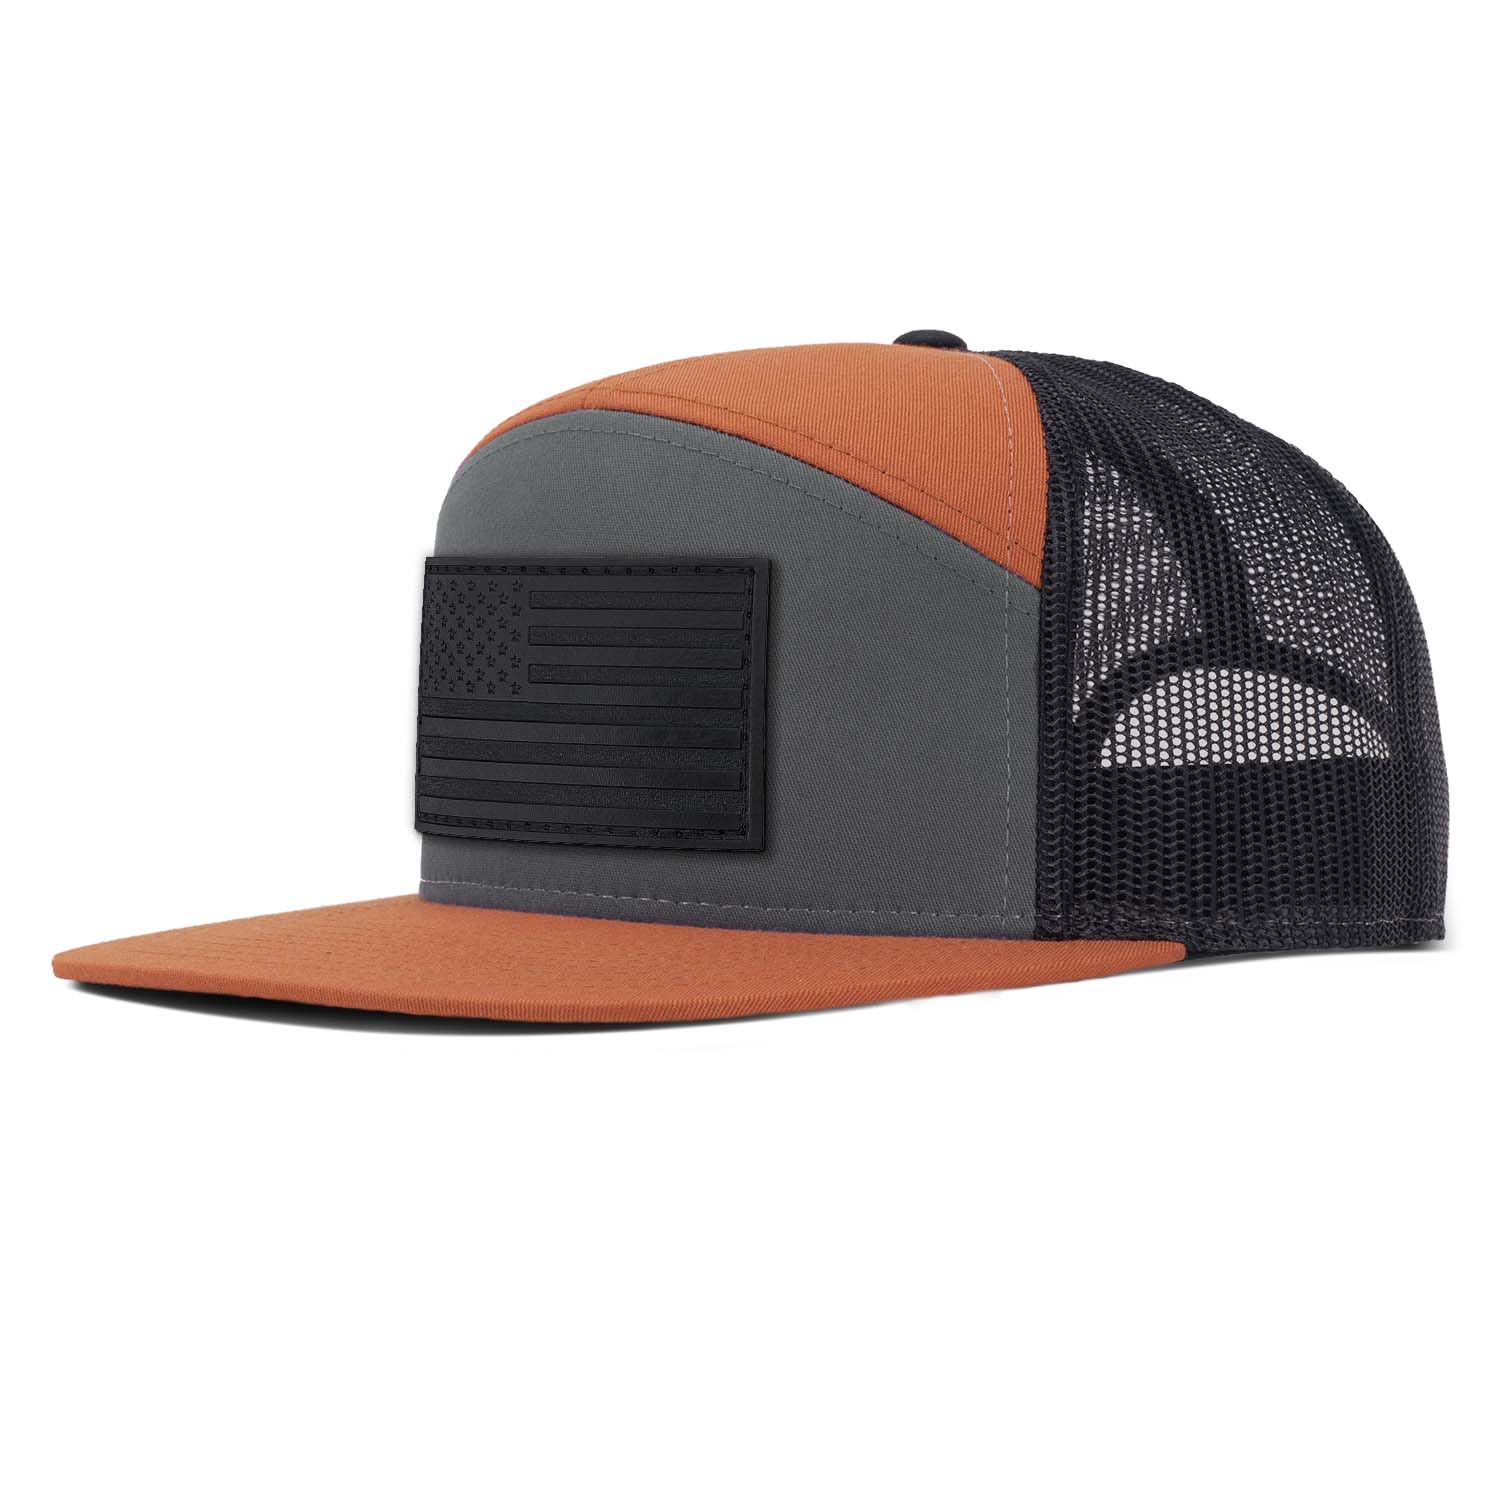 Revolution Mfg charcoal and burnt orange with black mesh 7 panel trucker featuring our full grain black leather American Flag patch on the seamless front panel.